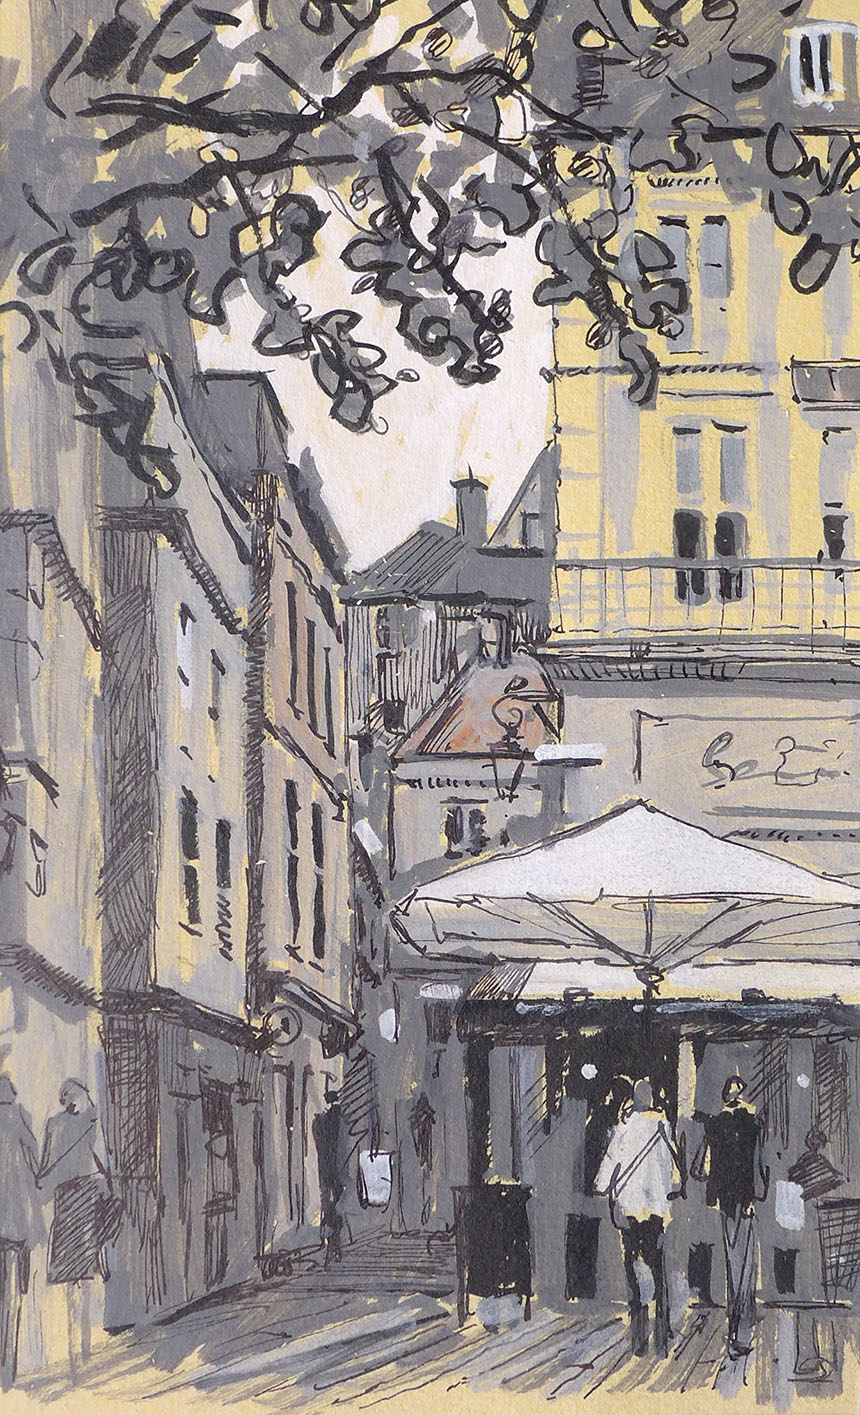 St malo, France, drawing